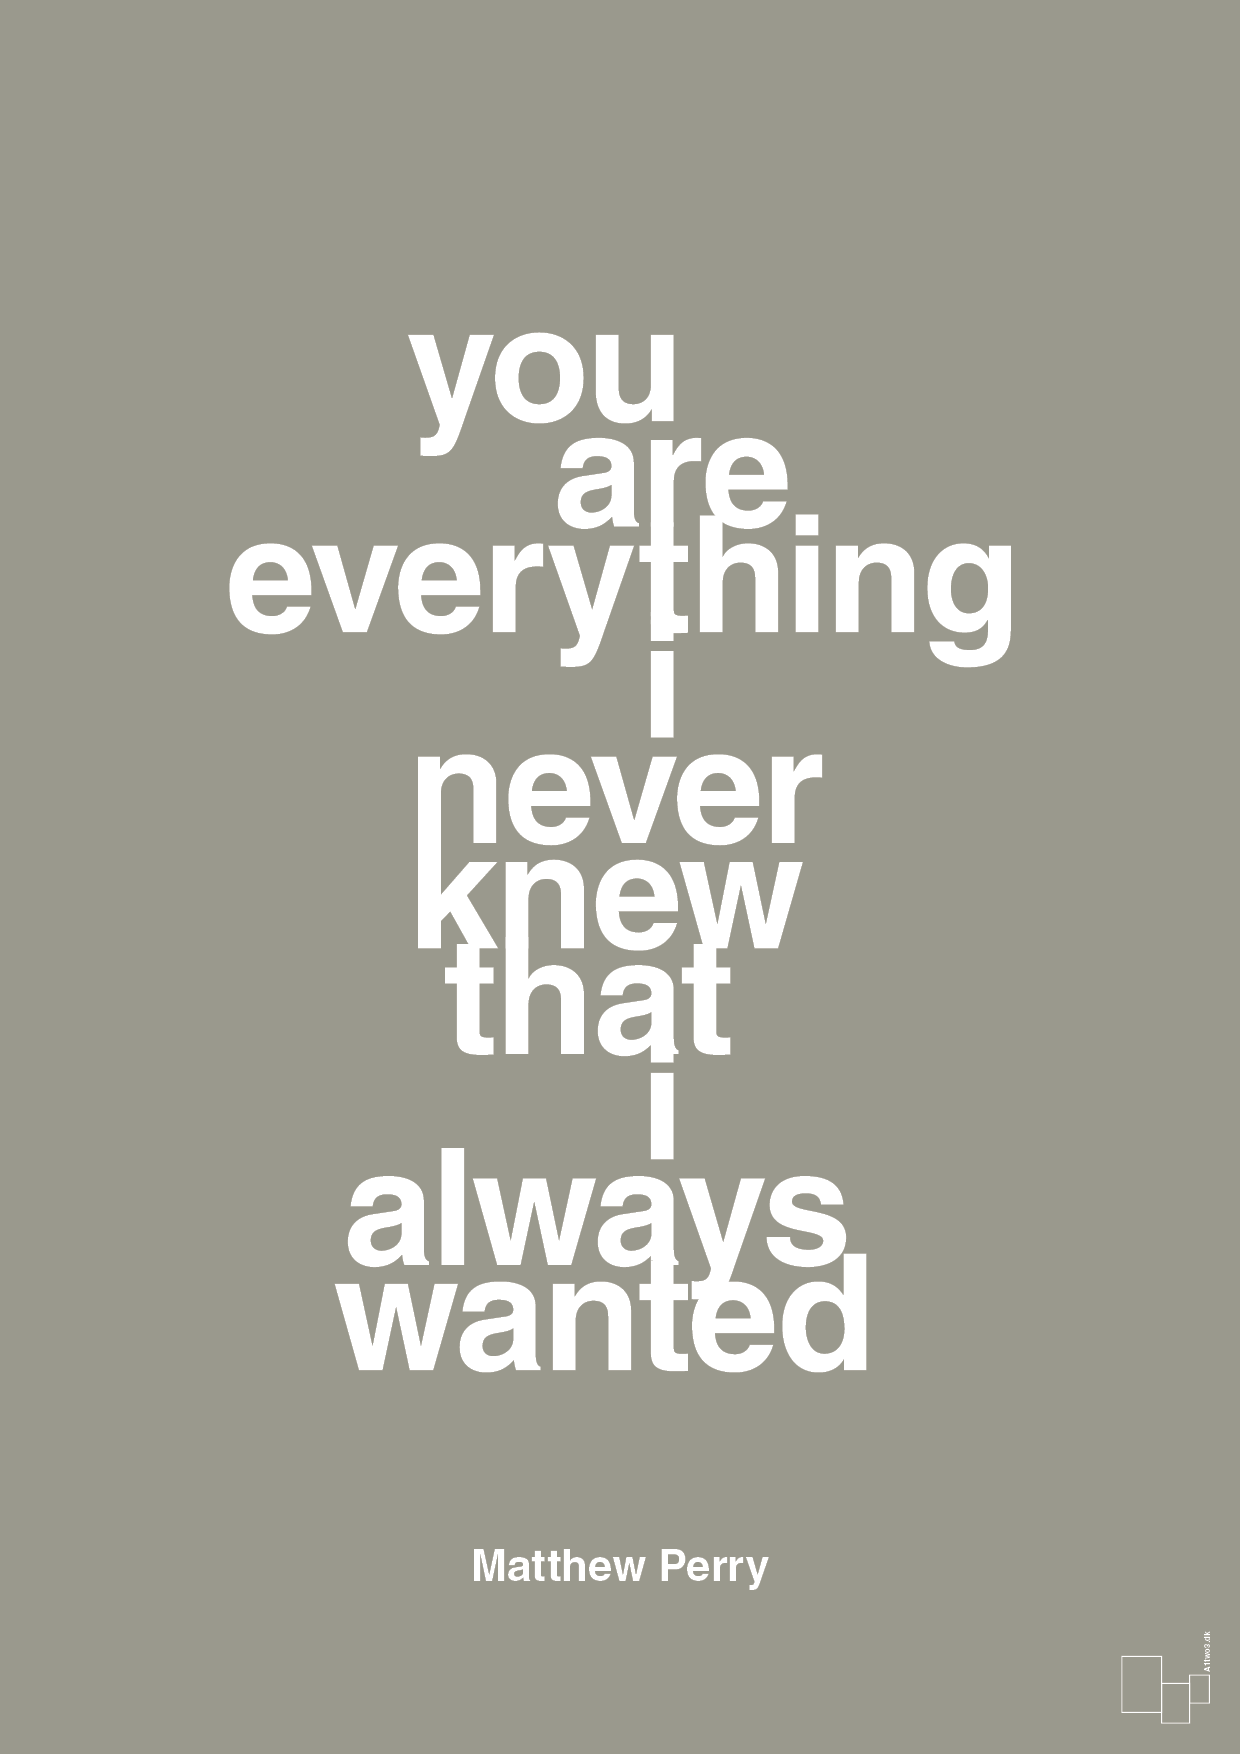 you are everything i never knew that i always wanted - Plakat med Citater i Battleship Gray